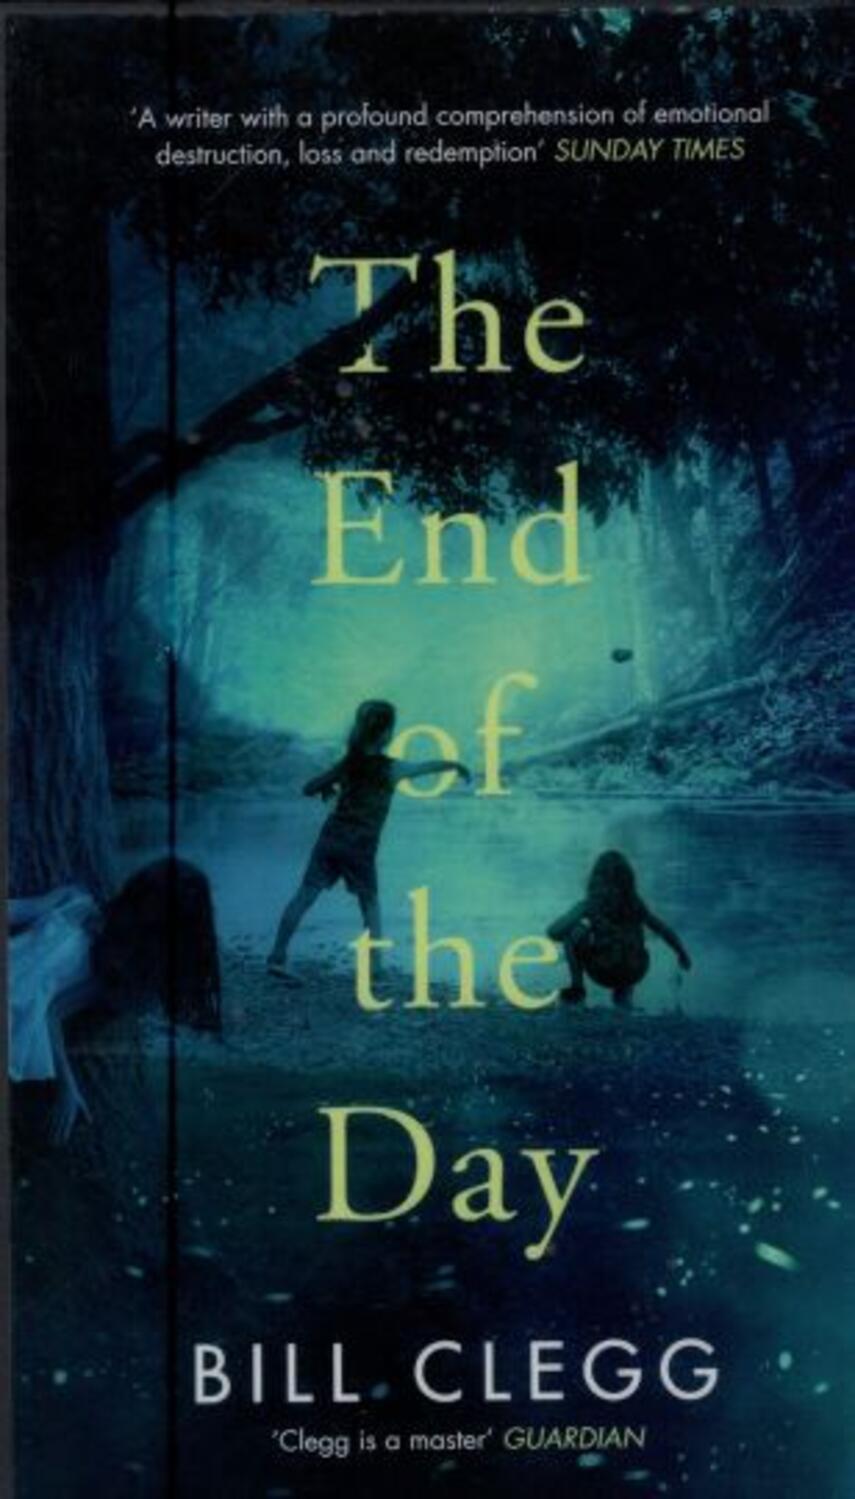 Bill Clegg: The end of the day